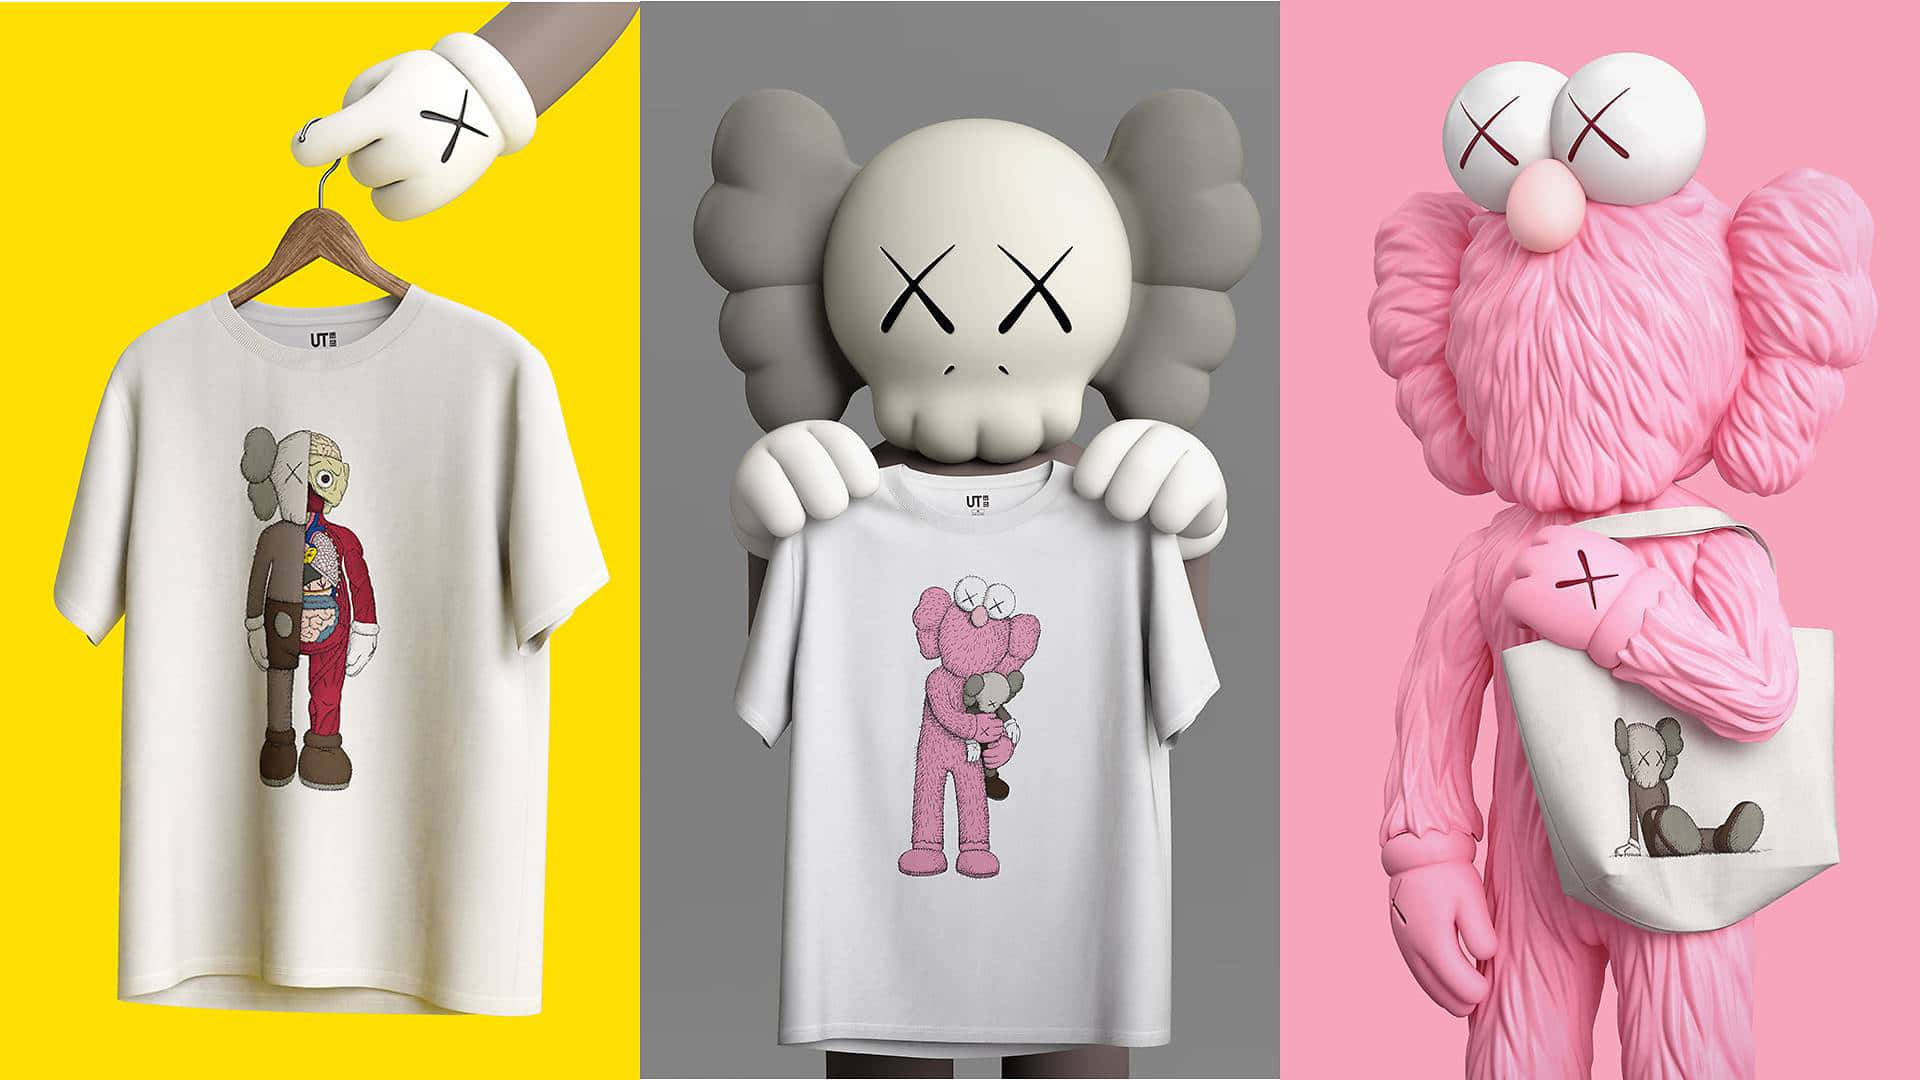 “Nothing But Chills with Cool Kaws!” Wallpaper